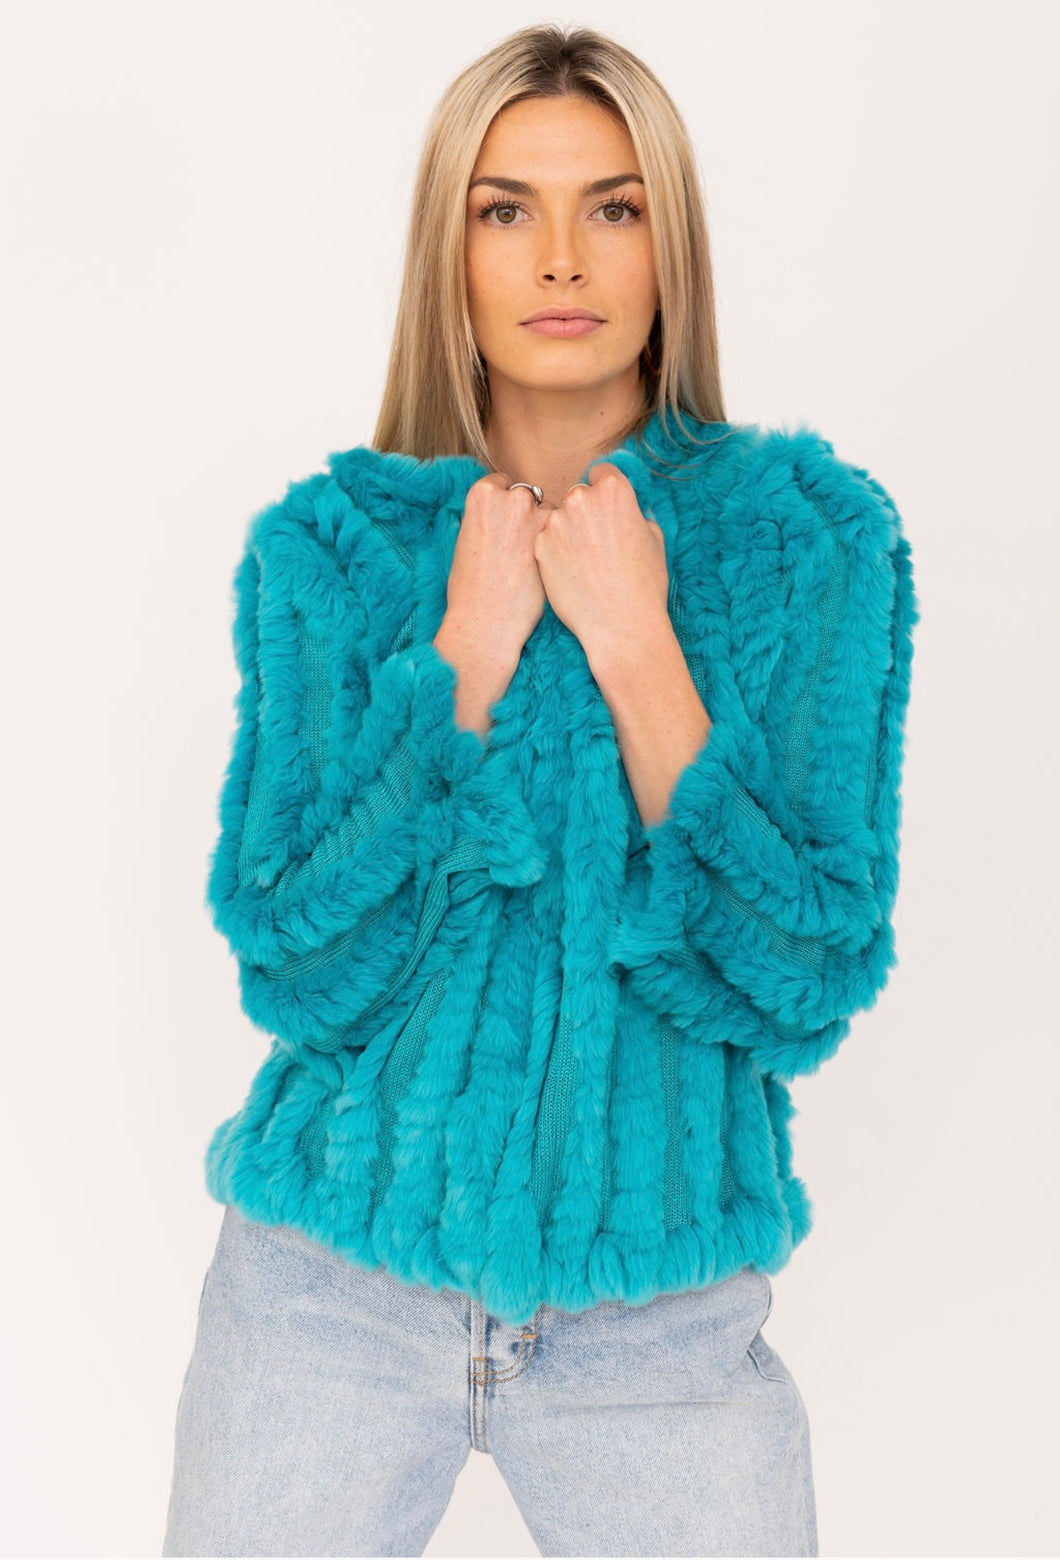 Knitted Fur Jackets